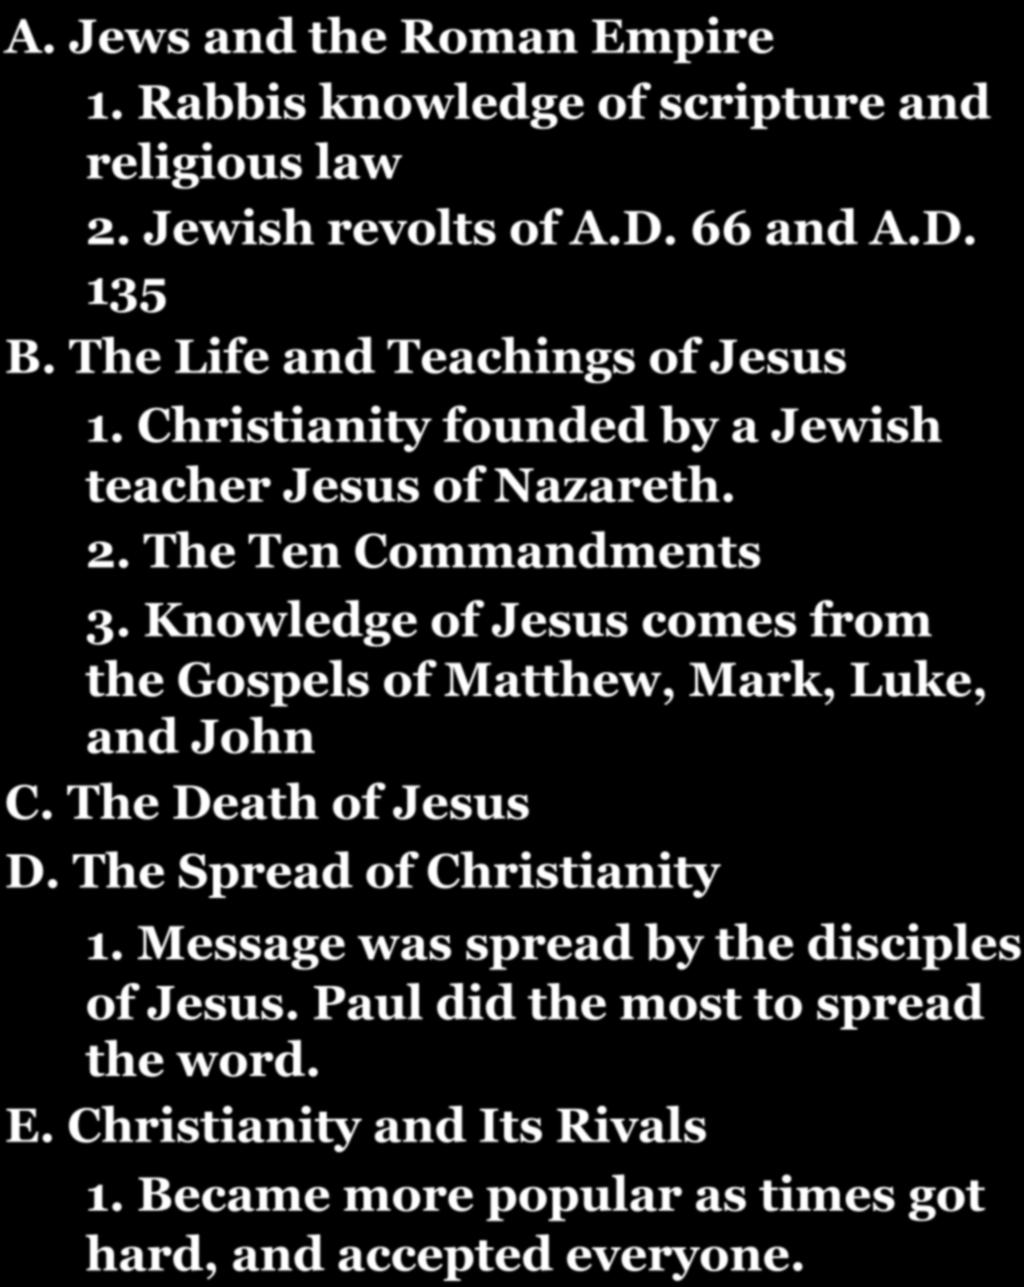 CHAPTER 7-SECTION 5: THE RISE OF CHRISTIANITY! A. Jews and the Roman Empire 1. Rabbis knowledge of scripture and religious law 2. Jewish revolts of A.D. 66 and A.D. 135 B.